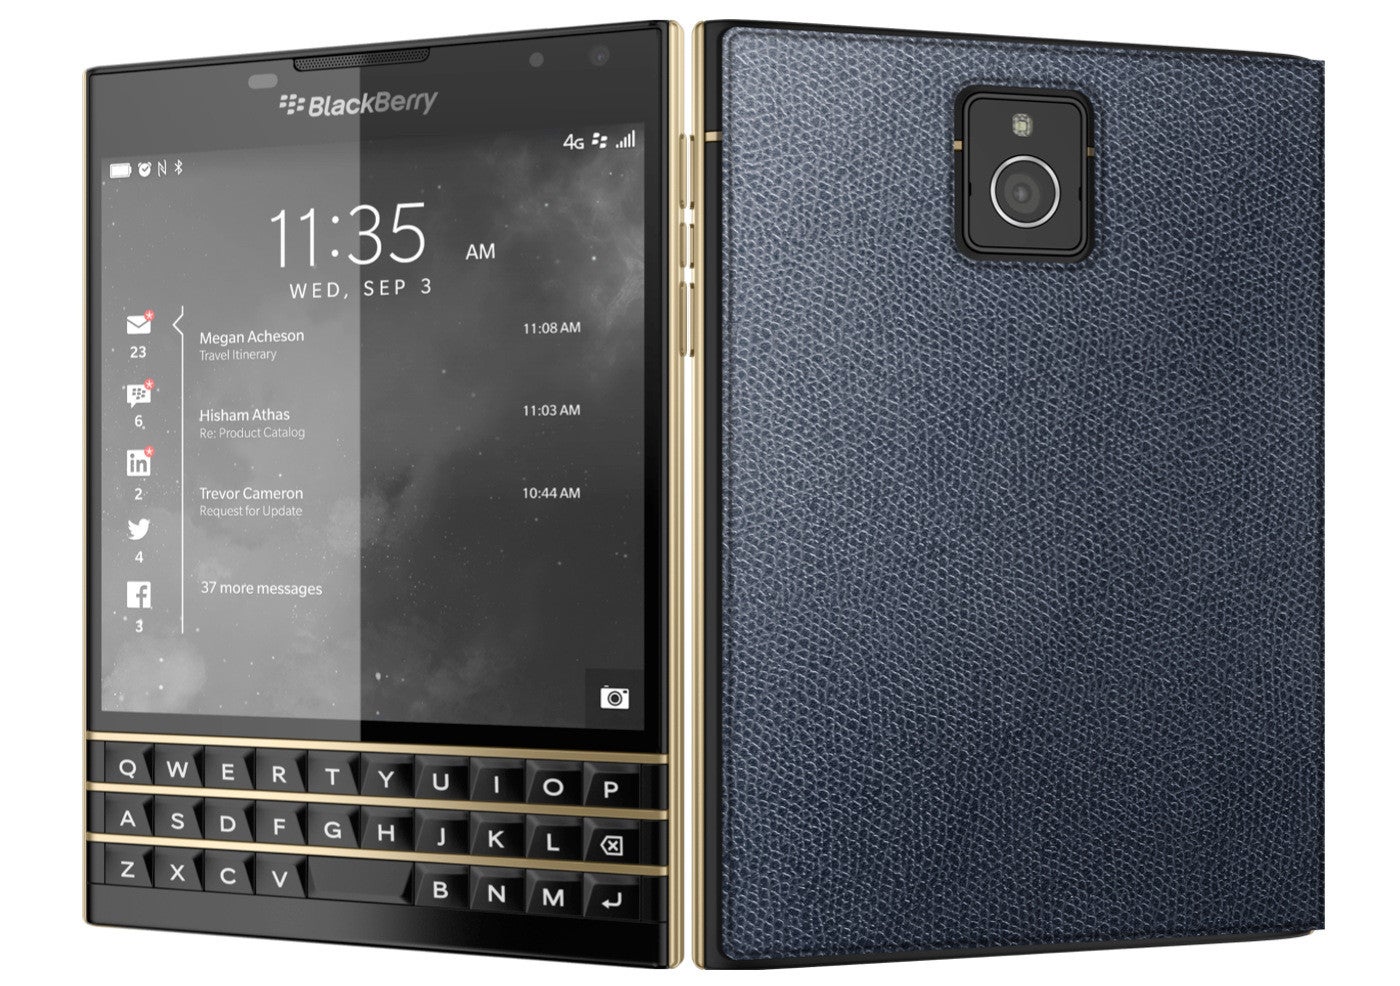 Only 50 units of this BlackBerry Passport Black & Gold edition exist, there's no gold on board though